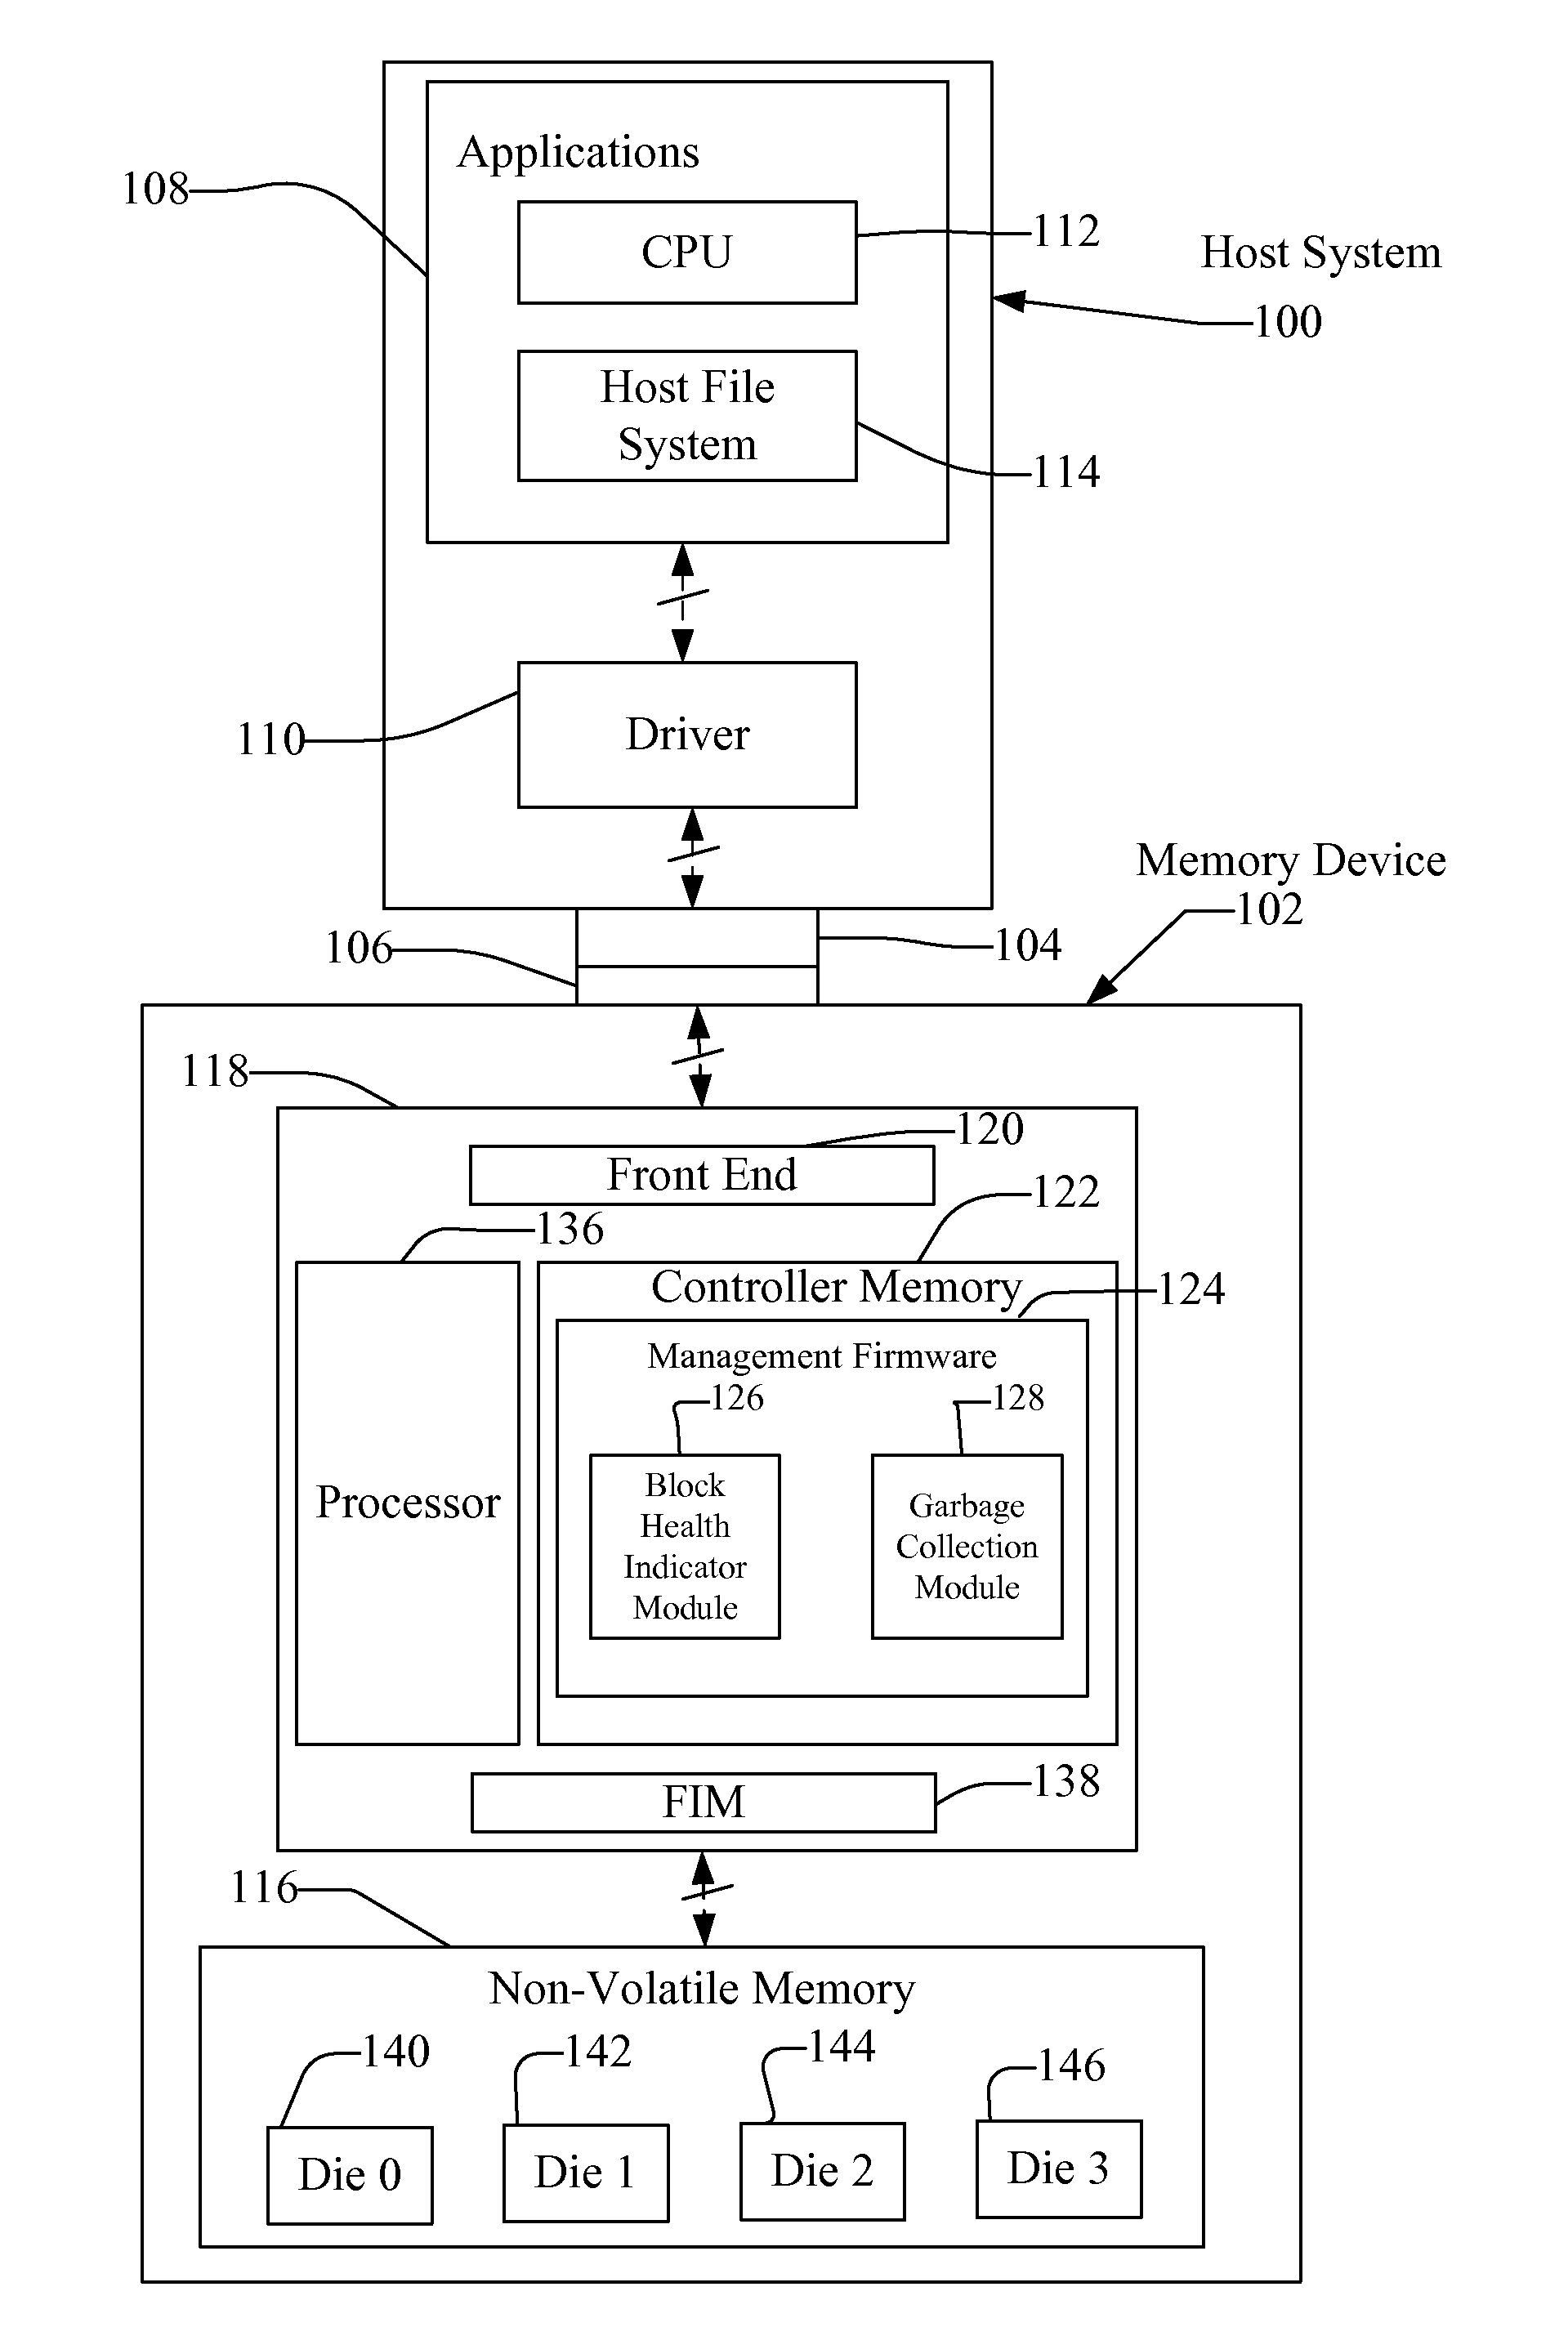 System and Method for Selecting Blocks for Garbage Collection Based on Block Health